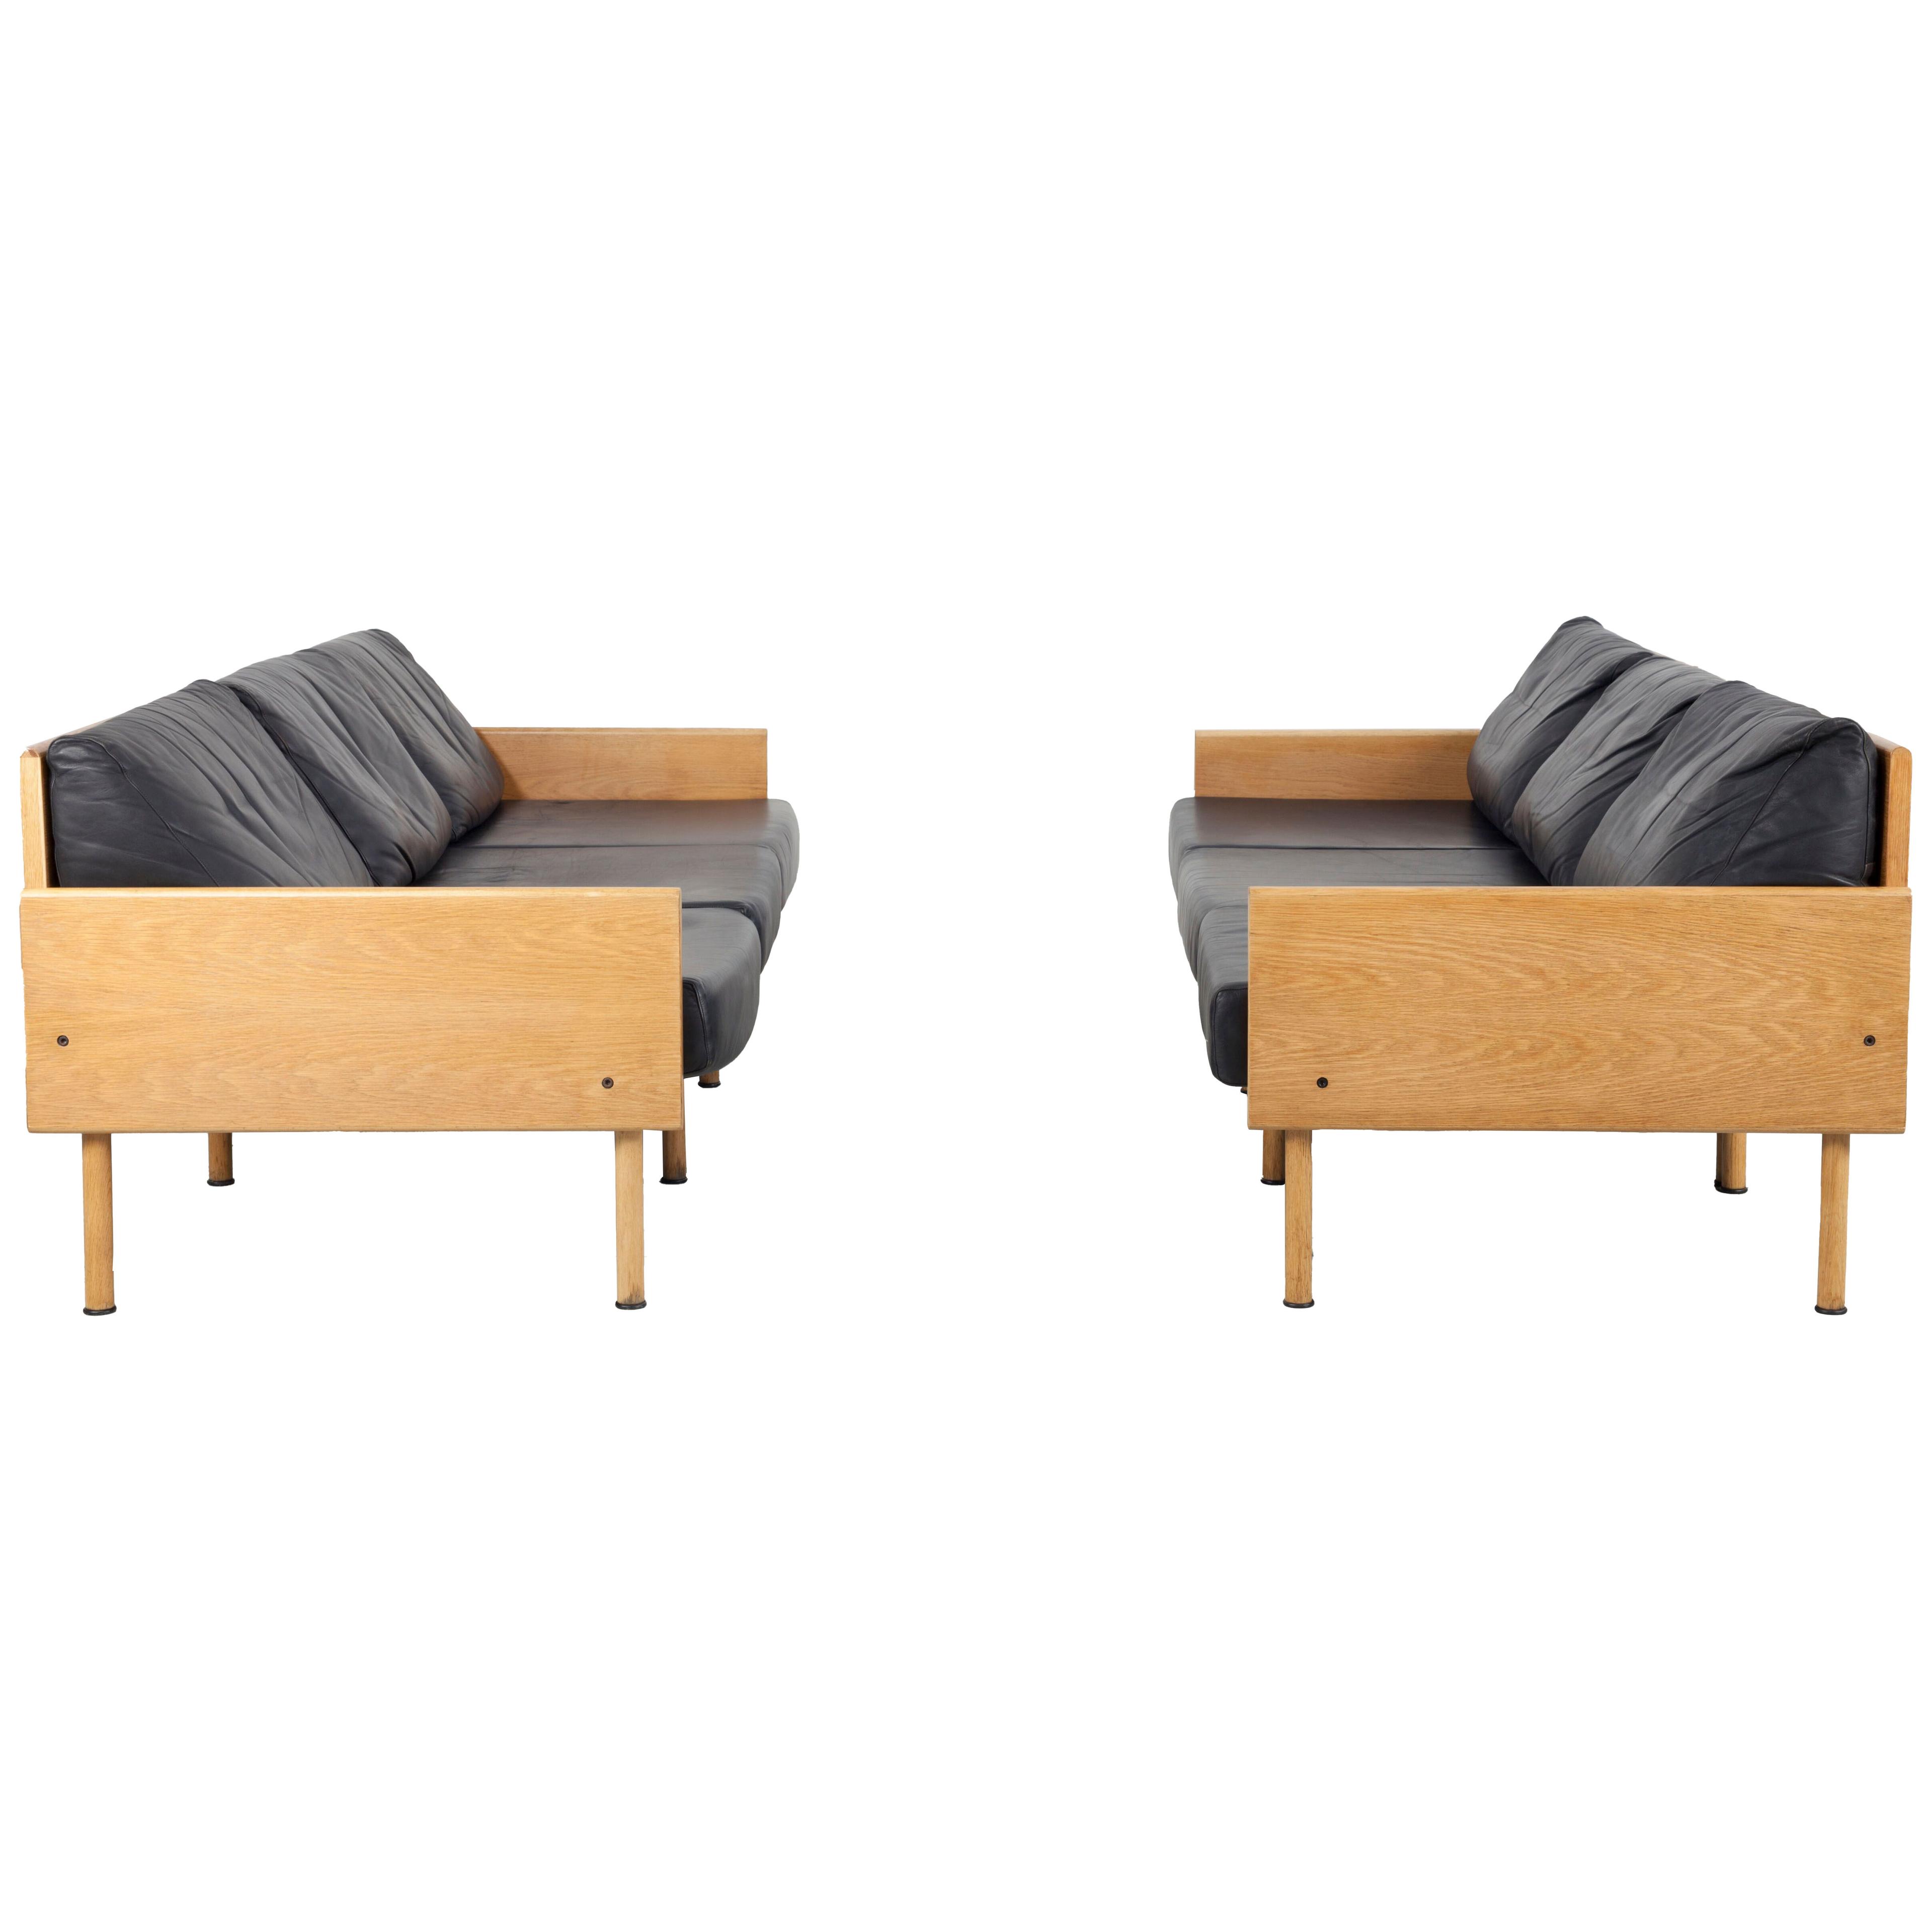 Set of 2 Sofas and 2 Chairs, by Yrjö Kukkapuro for Haimi Finland, 1963